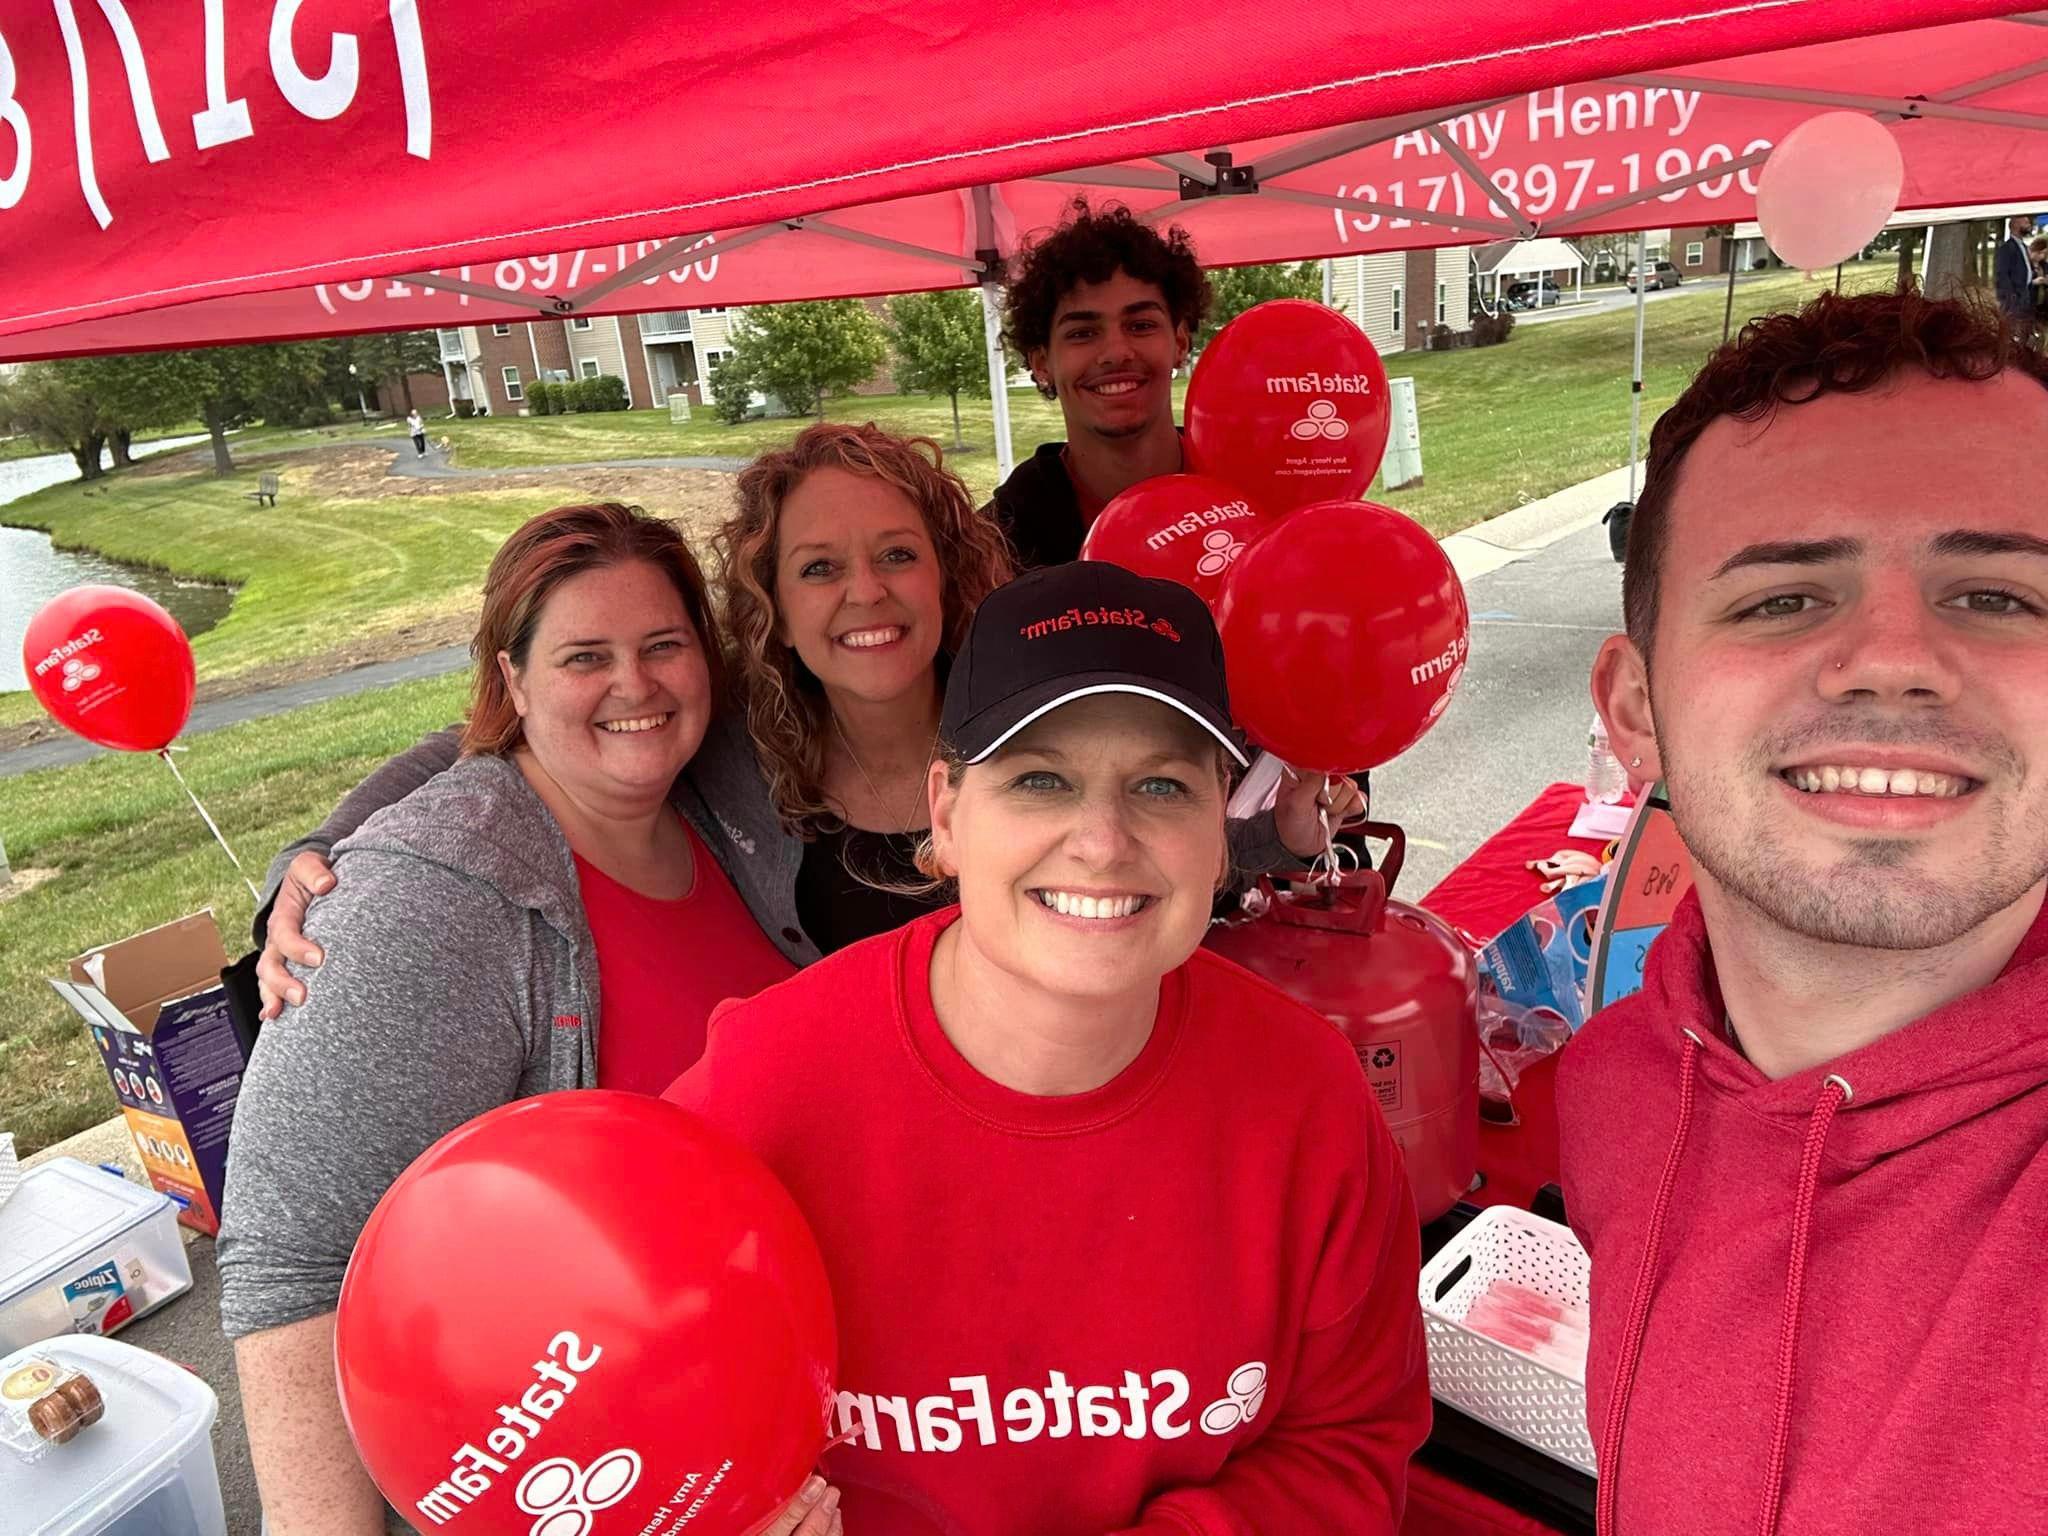 🚨👩‍🌾🌽 Safety Day at Fishers Farmers Market! 🌽👩‍🌾🚨
Hey everyone, it's Amy Henry, your local State Farm agent! 🚗💨
What an incredible day we had at the Fishers Farmers Market today for Safety Day! 🙌🏡👨‍👩‍👧‍👦 We're all about protecting what matters most, and that includes your safety on the road and at home. 🏡🚘
We had a blast sharing important safety tips and information with our amazing community. From car seat safety checks to home security advice, we covered it all! 🛡️🚸
A big shoutout to our dedicated team and everyone who stopped by to make this event a huge success! Your safety is our top priority, and we're here for you, Fishers! 🤝💚
Remember, if you have any questions about insurance or need advice on keeping your family and property safe, don't hesitate to reach out. We're just a call or message away. 📞💬
Stay safe, Fishers! 👍🏡🚗 #SafetyDay #CommunityFirst #StateFarmAgent
#amyhenrystatefarm